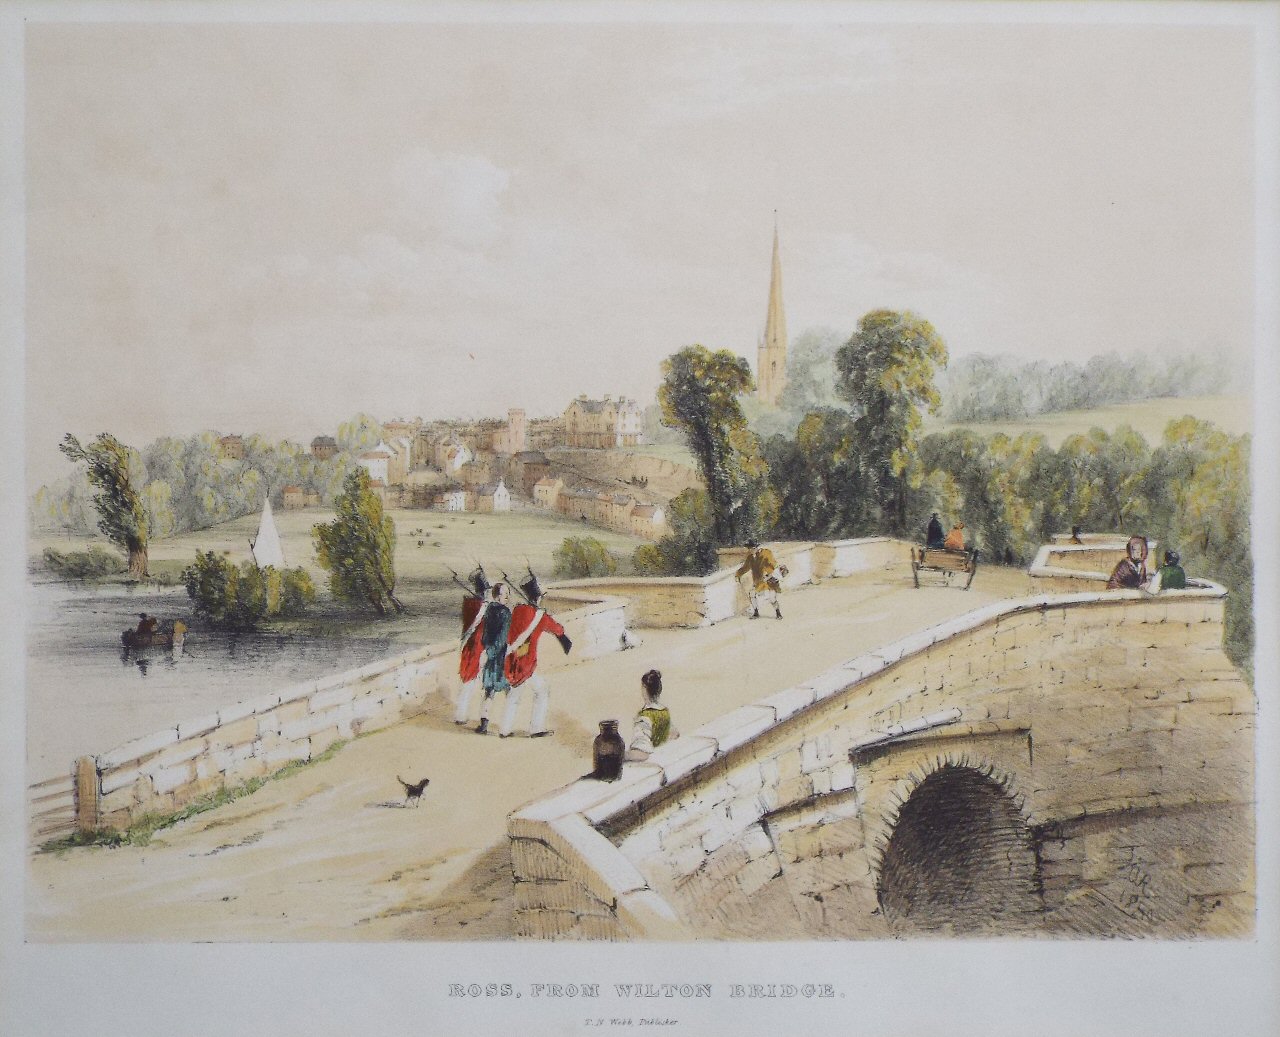 Lithograph - Ross, from Wilton Bridge.